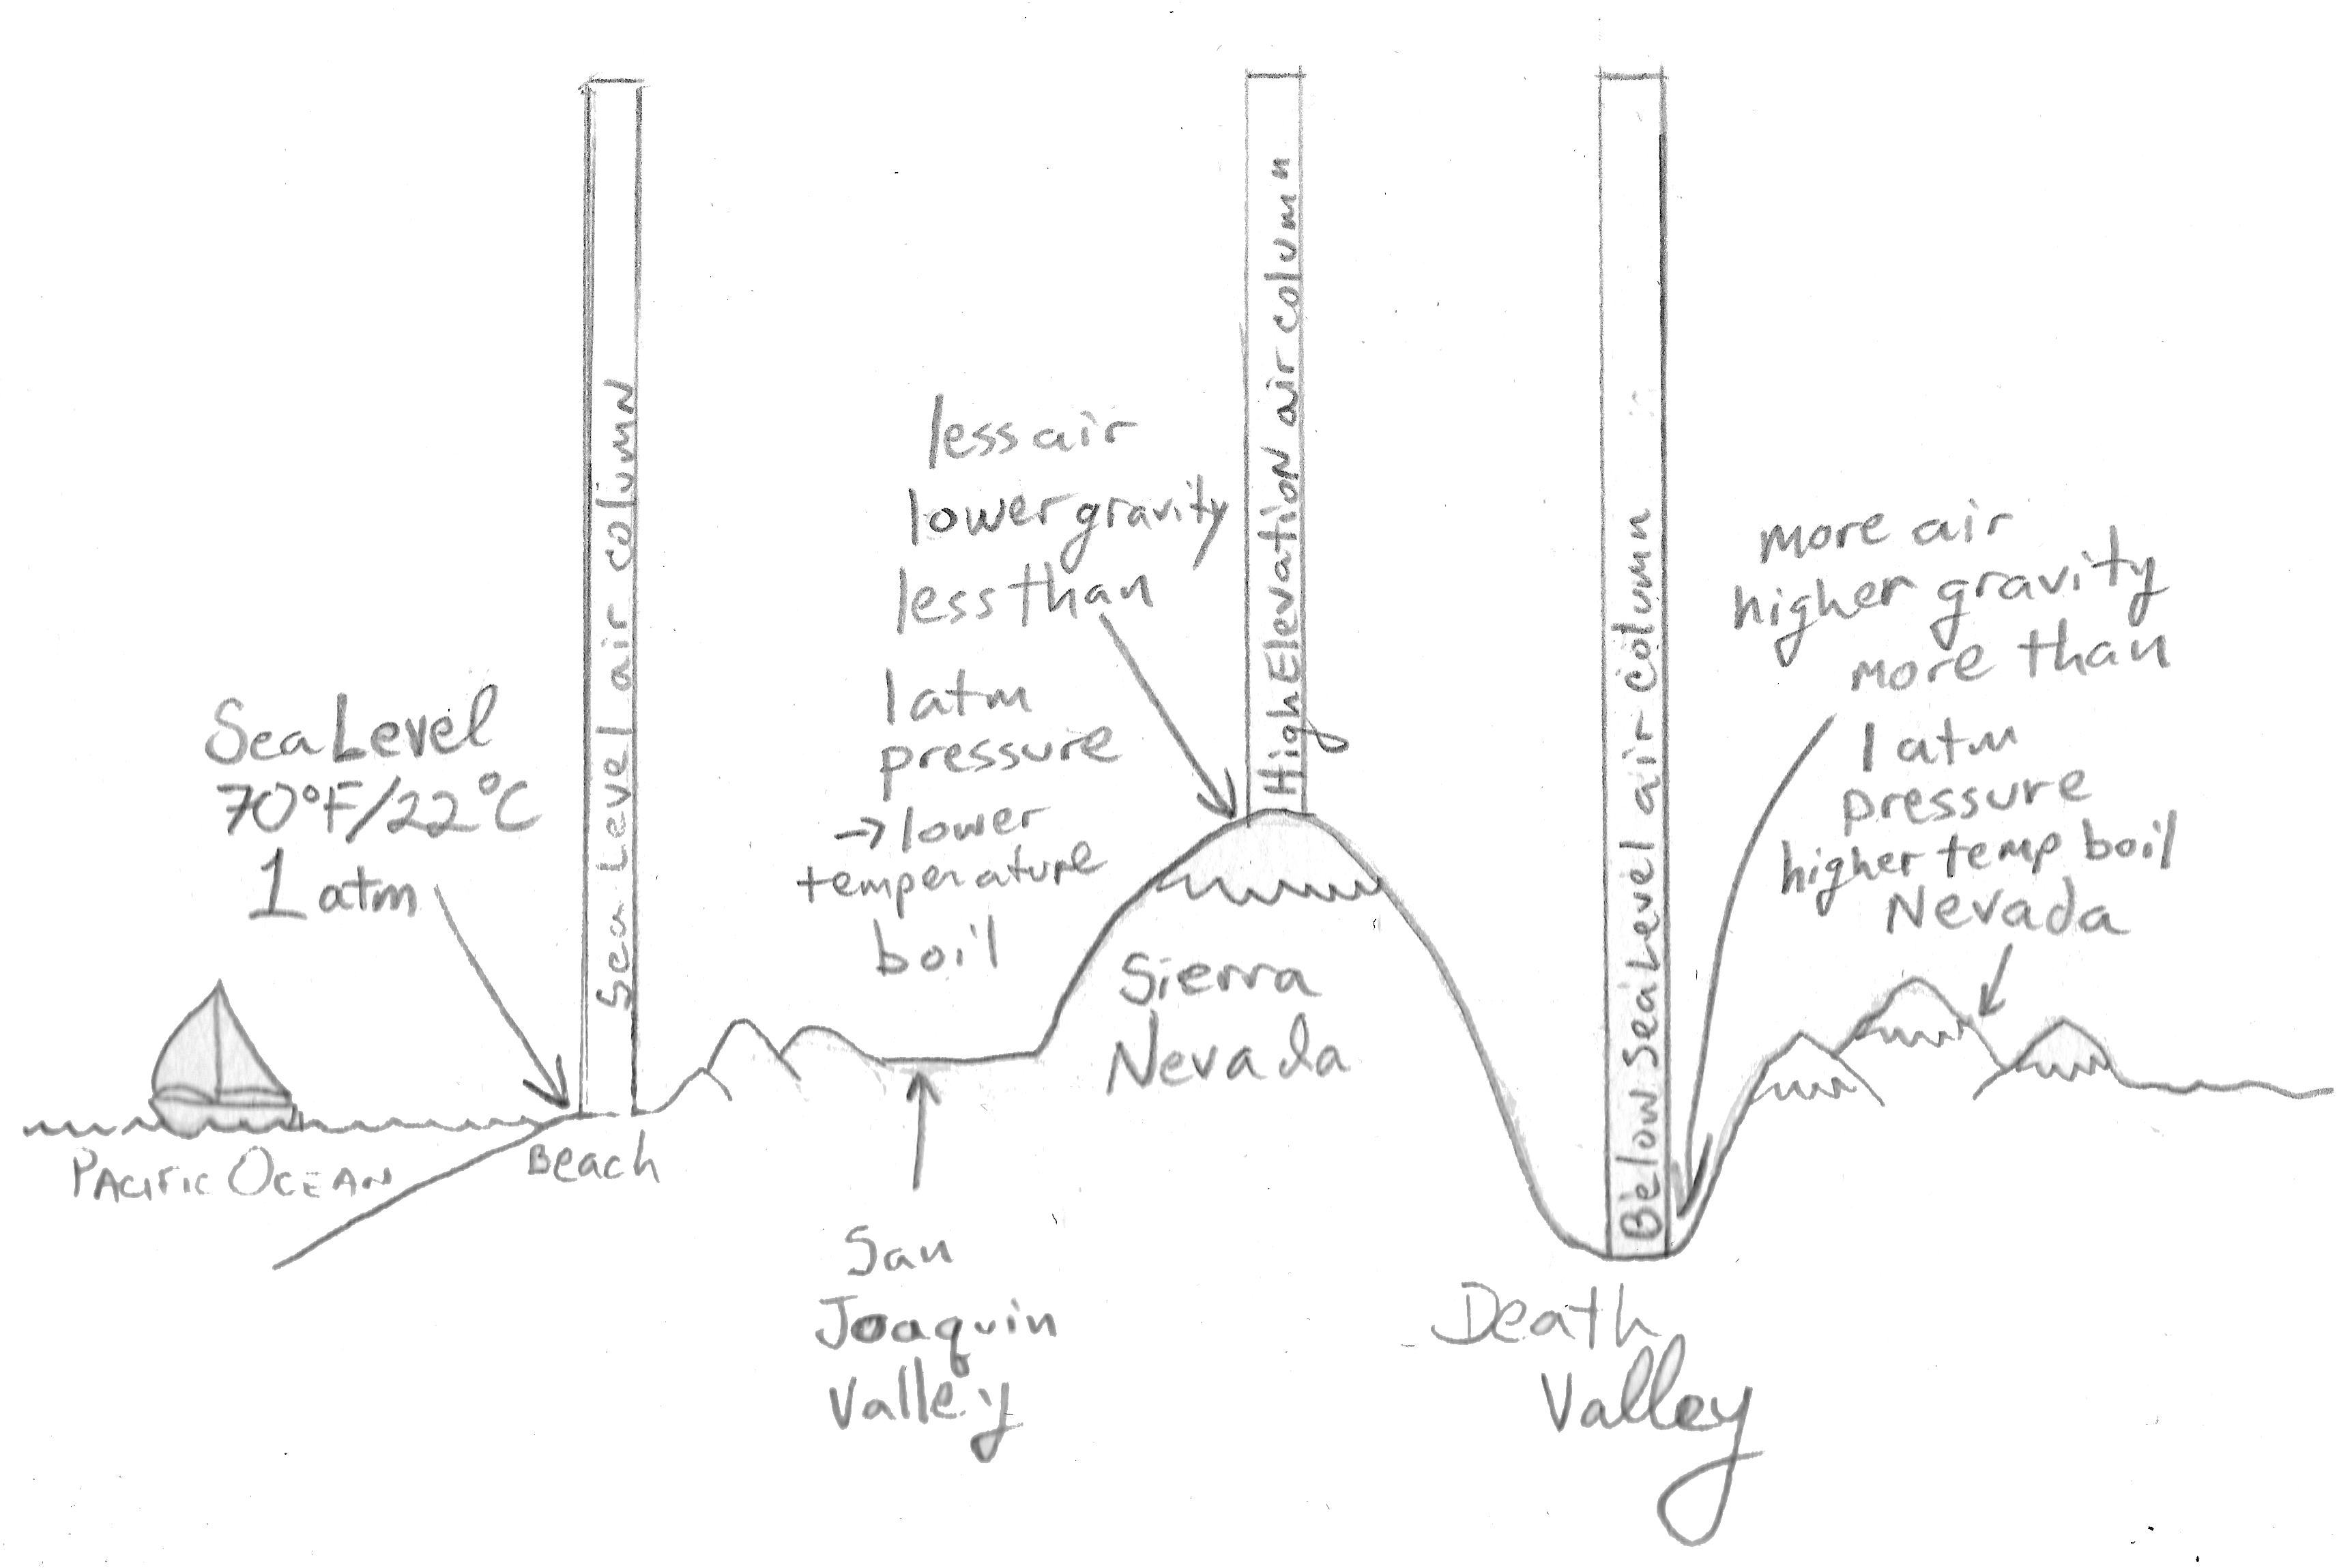 A diagram of how air columns and the atmospheric pressure they exert changes with elevation, with air columns at sea level, at altitude in the mountains and below sea level.